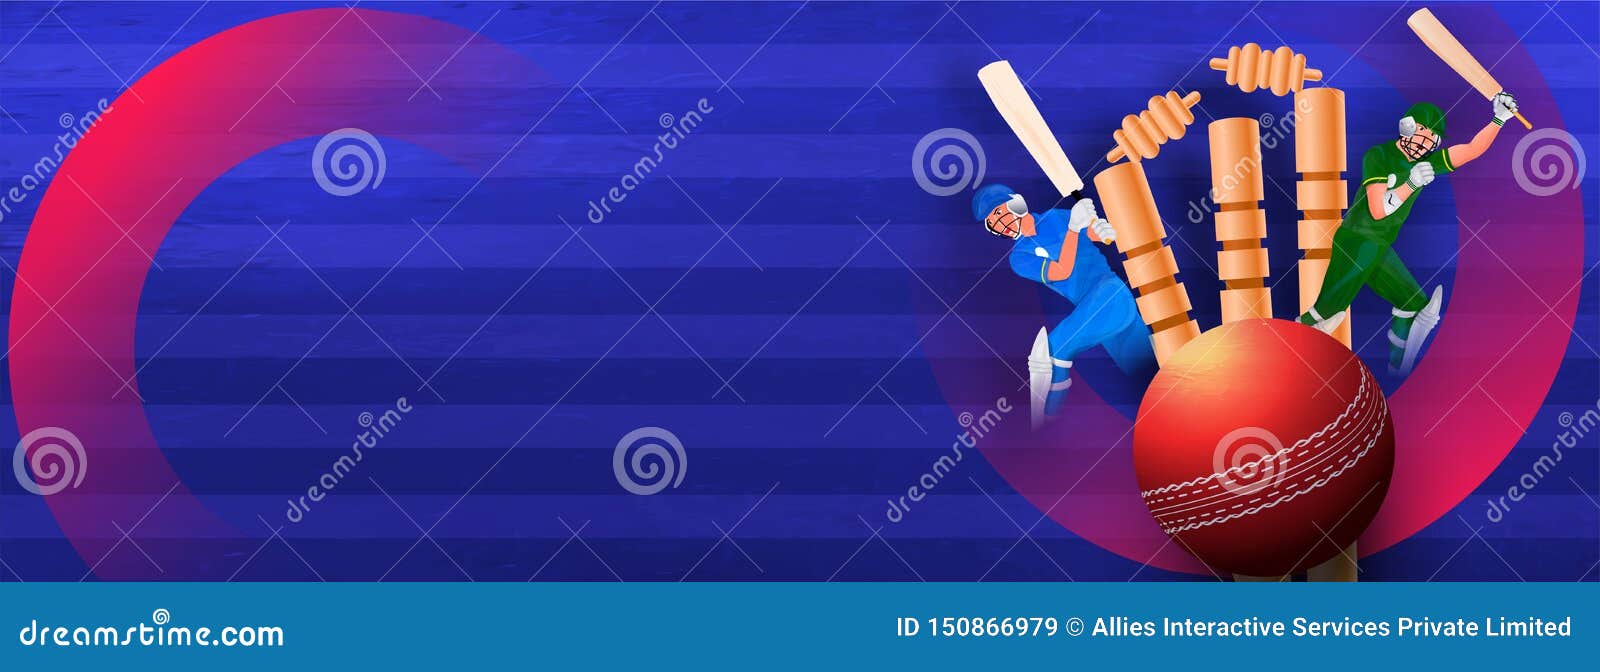 website header or banner  with cricket tournaments and batsman character for cricket league.